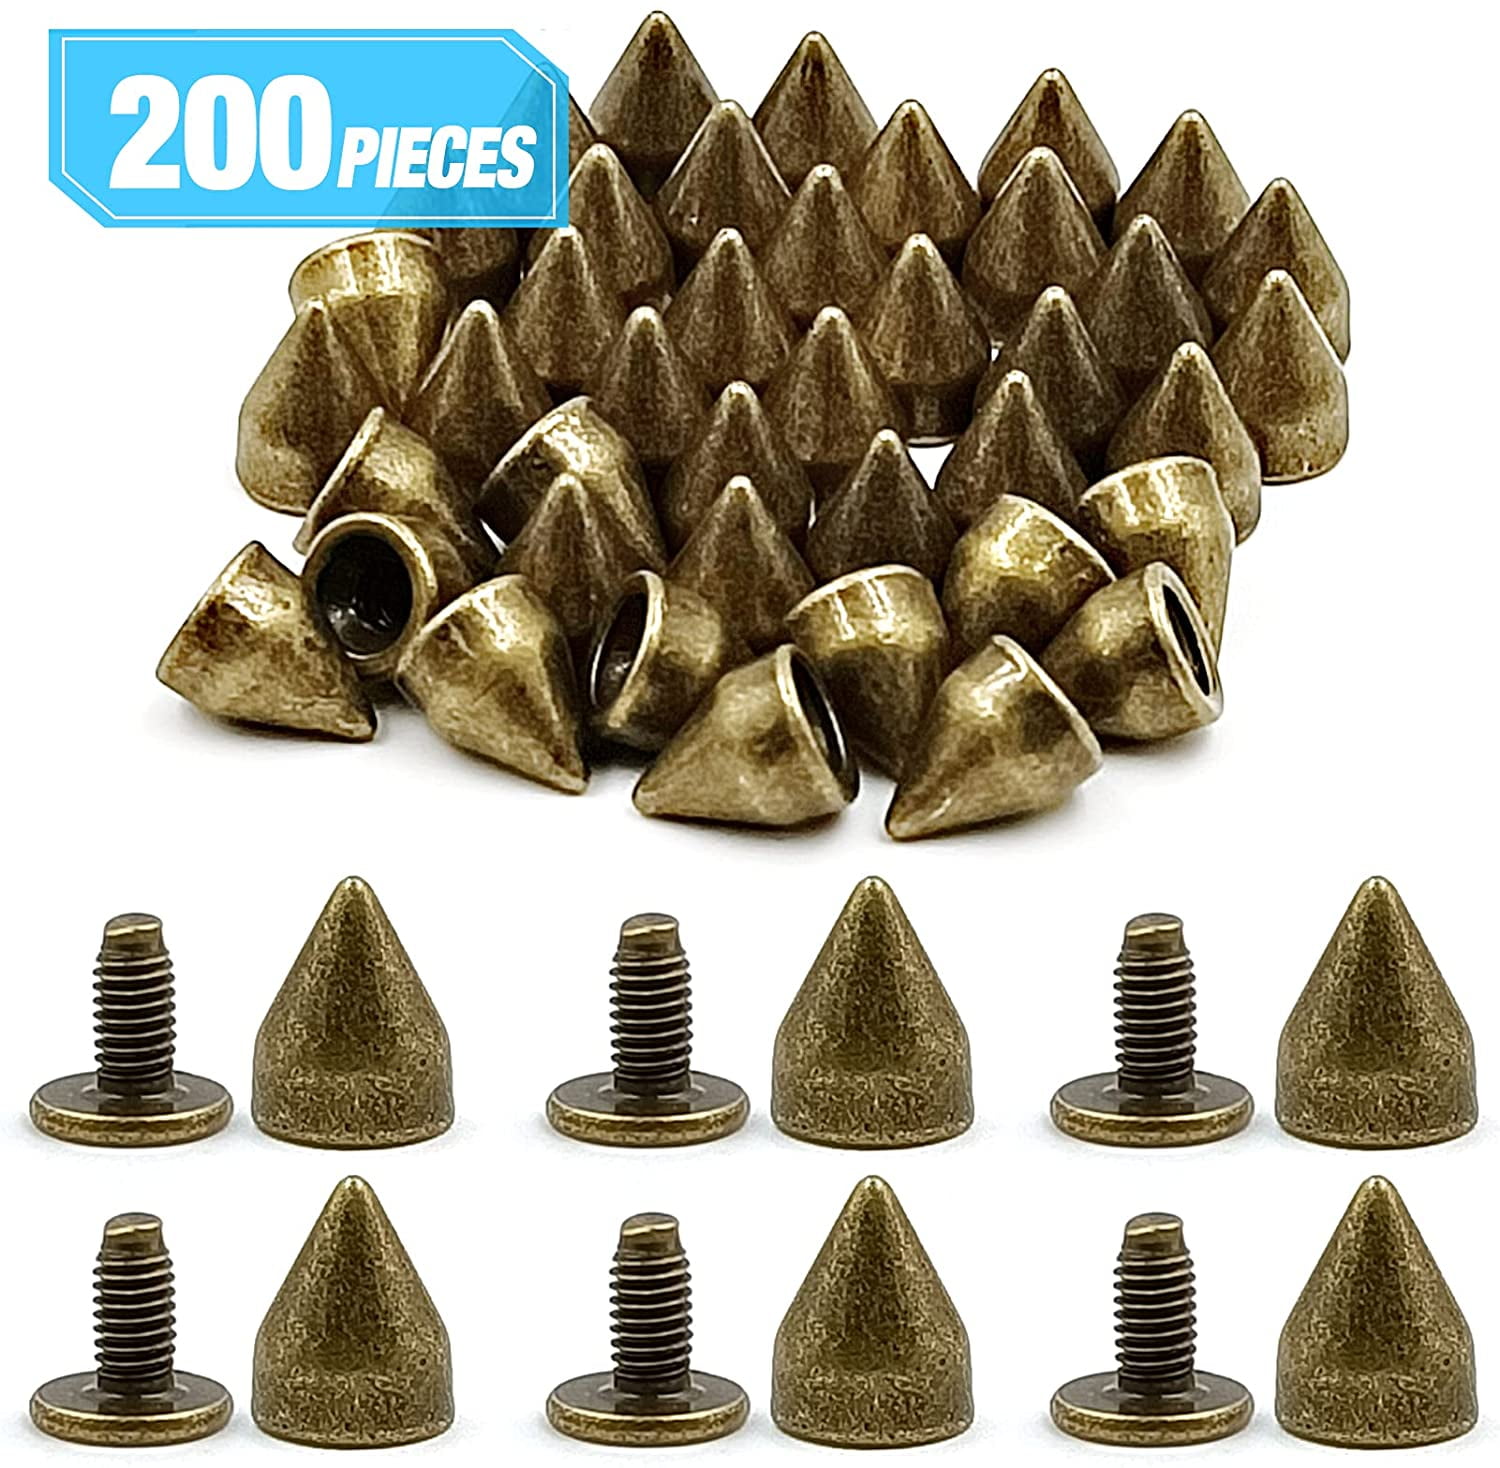 100 Sets 9MM Gold Spikes and Studs Metal Bullet Cone Spikes Screw Back Leather Craft Rapid Rivet Screws Punk Studs and Spikes for Clothing Shoes Leather Belts Bag Accessories 11/32 Inch 